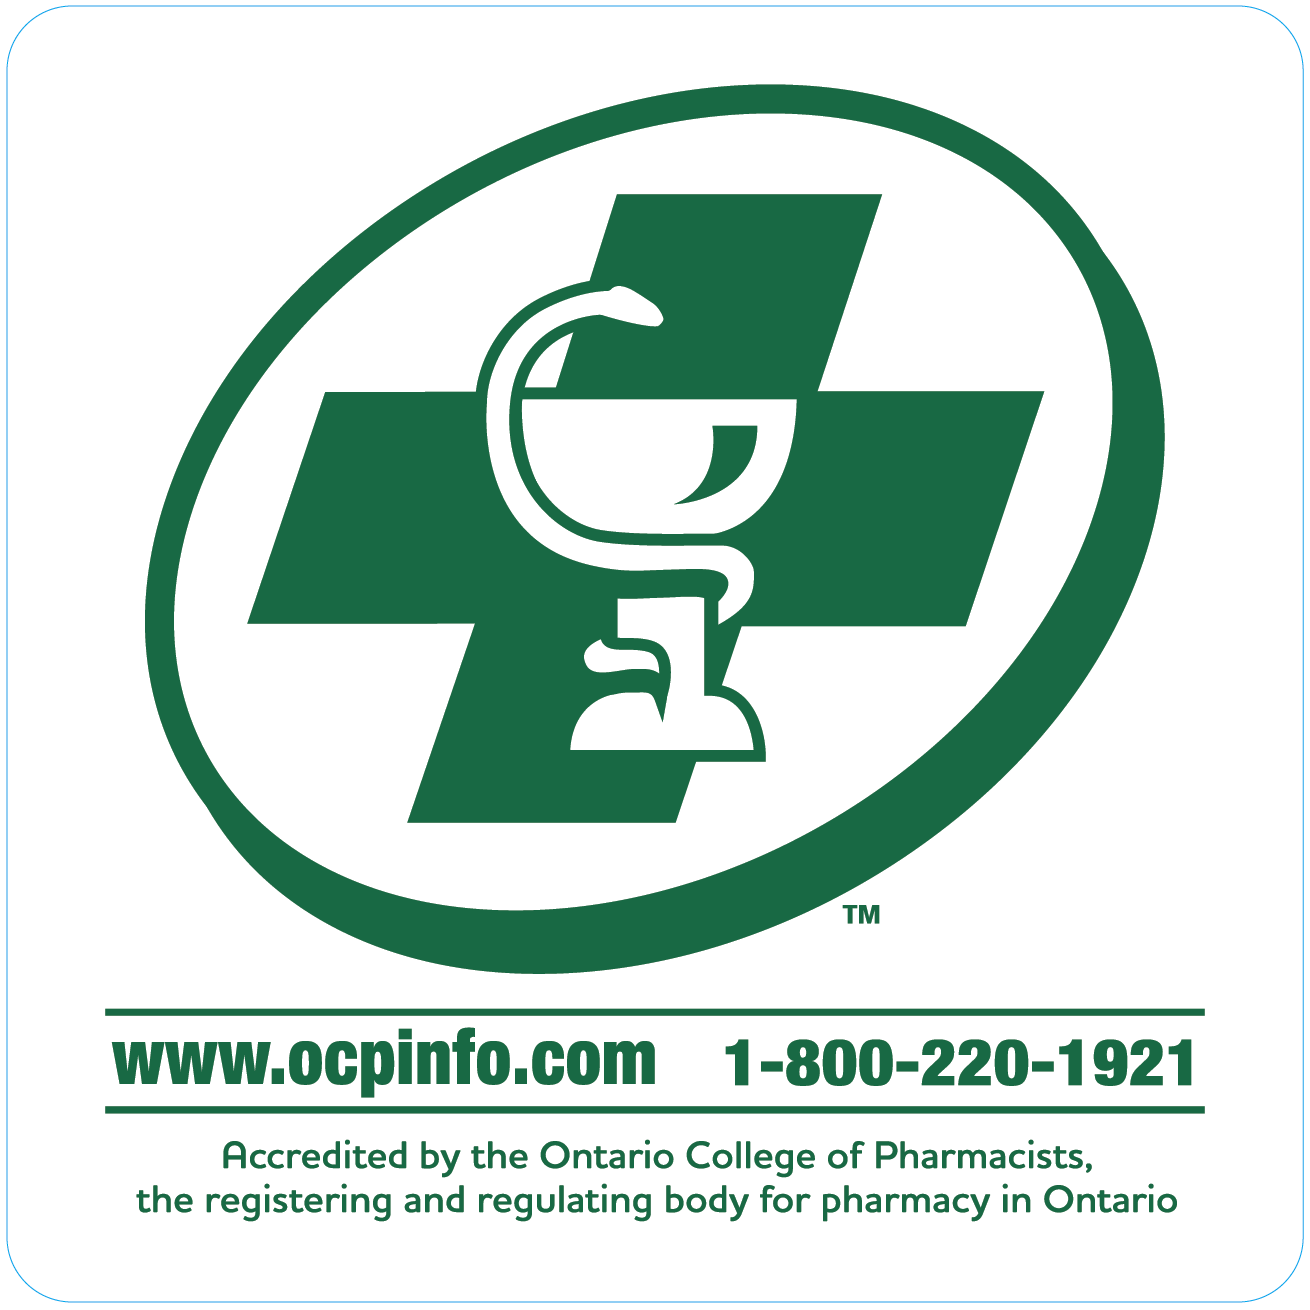 Accredited by the Ontario College of Pharmacists, www.ocpinfo.com